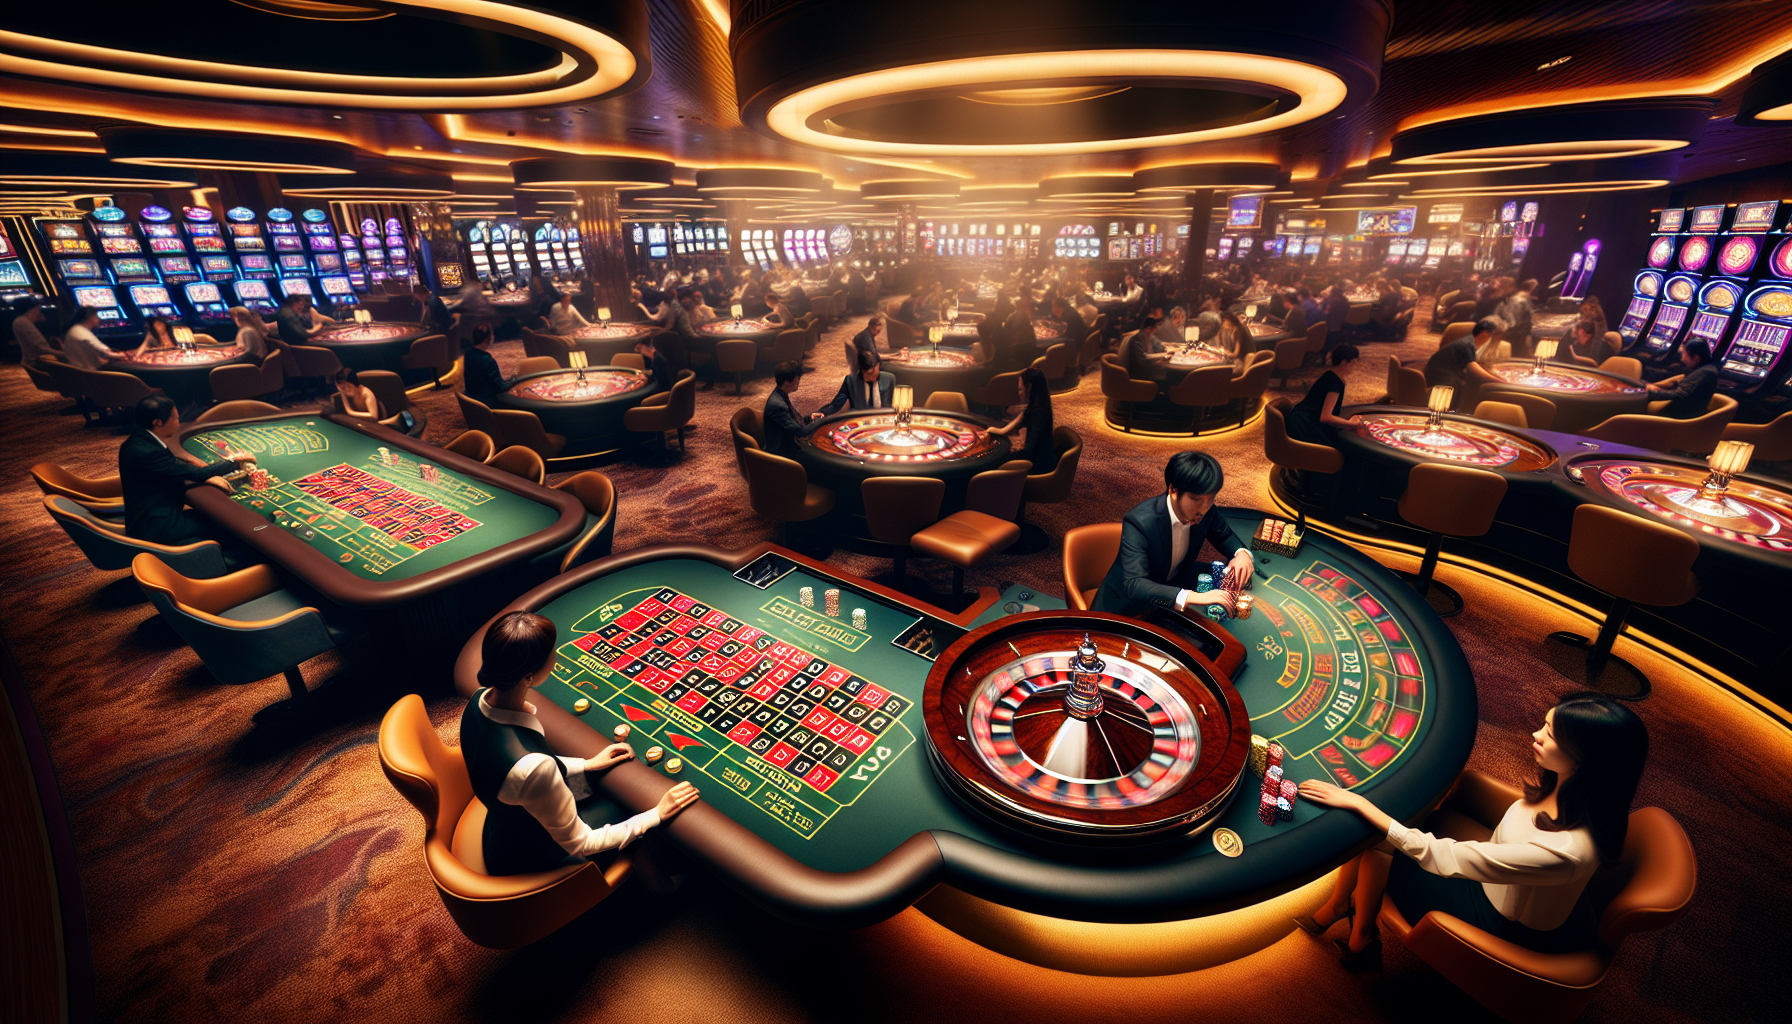 Immersive experience of Playson table games like European Roulette and Blackjack Low